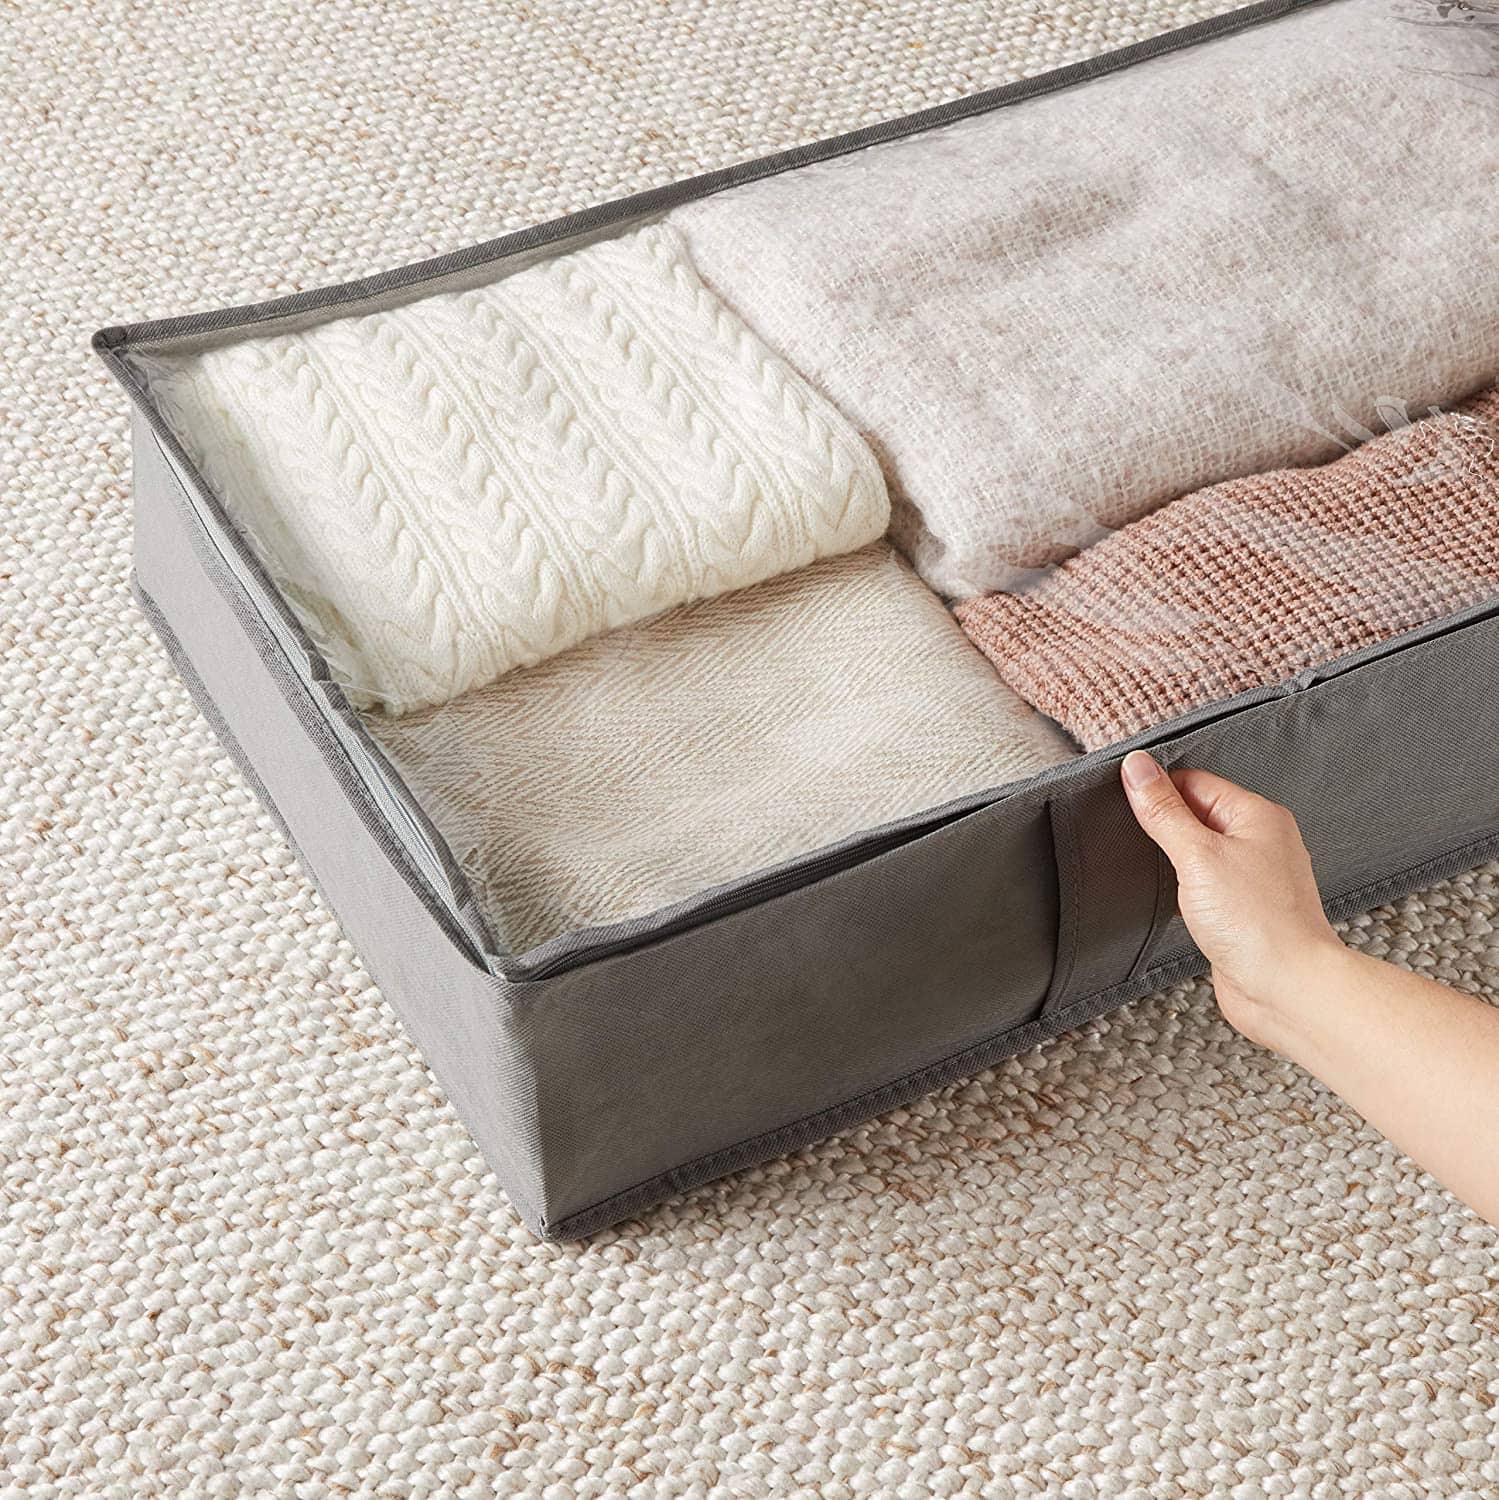 fabric under the bed storage container with stored linens